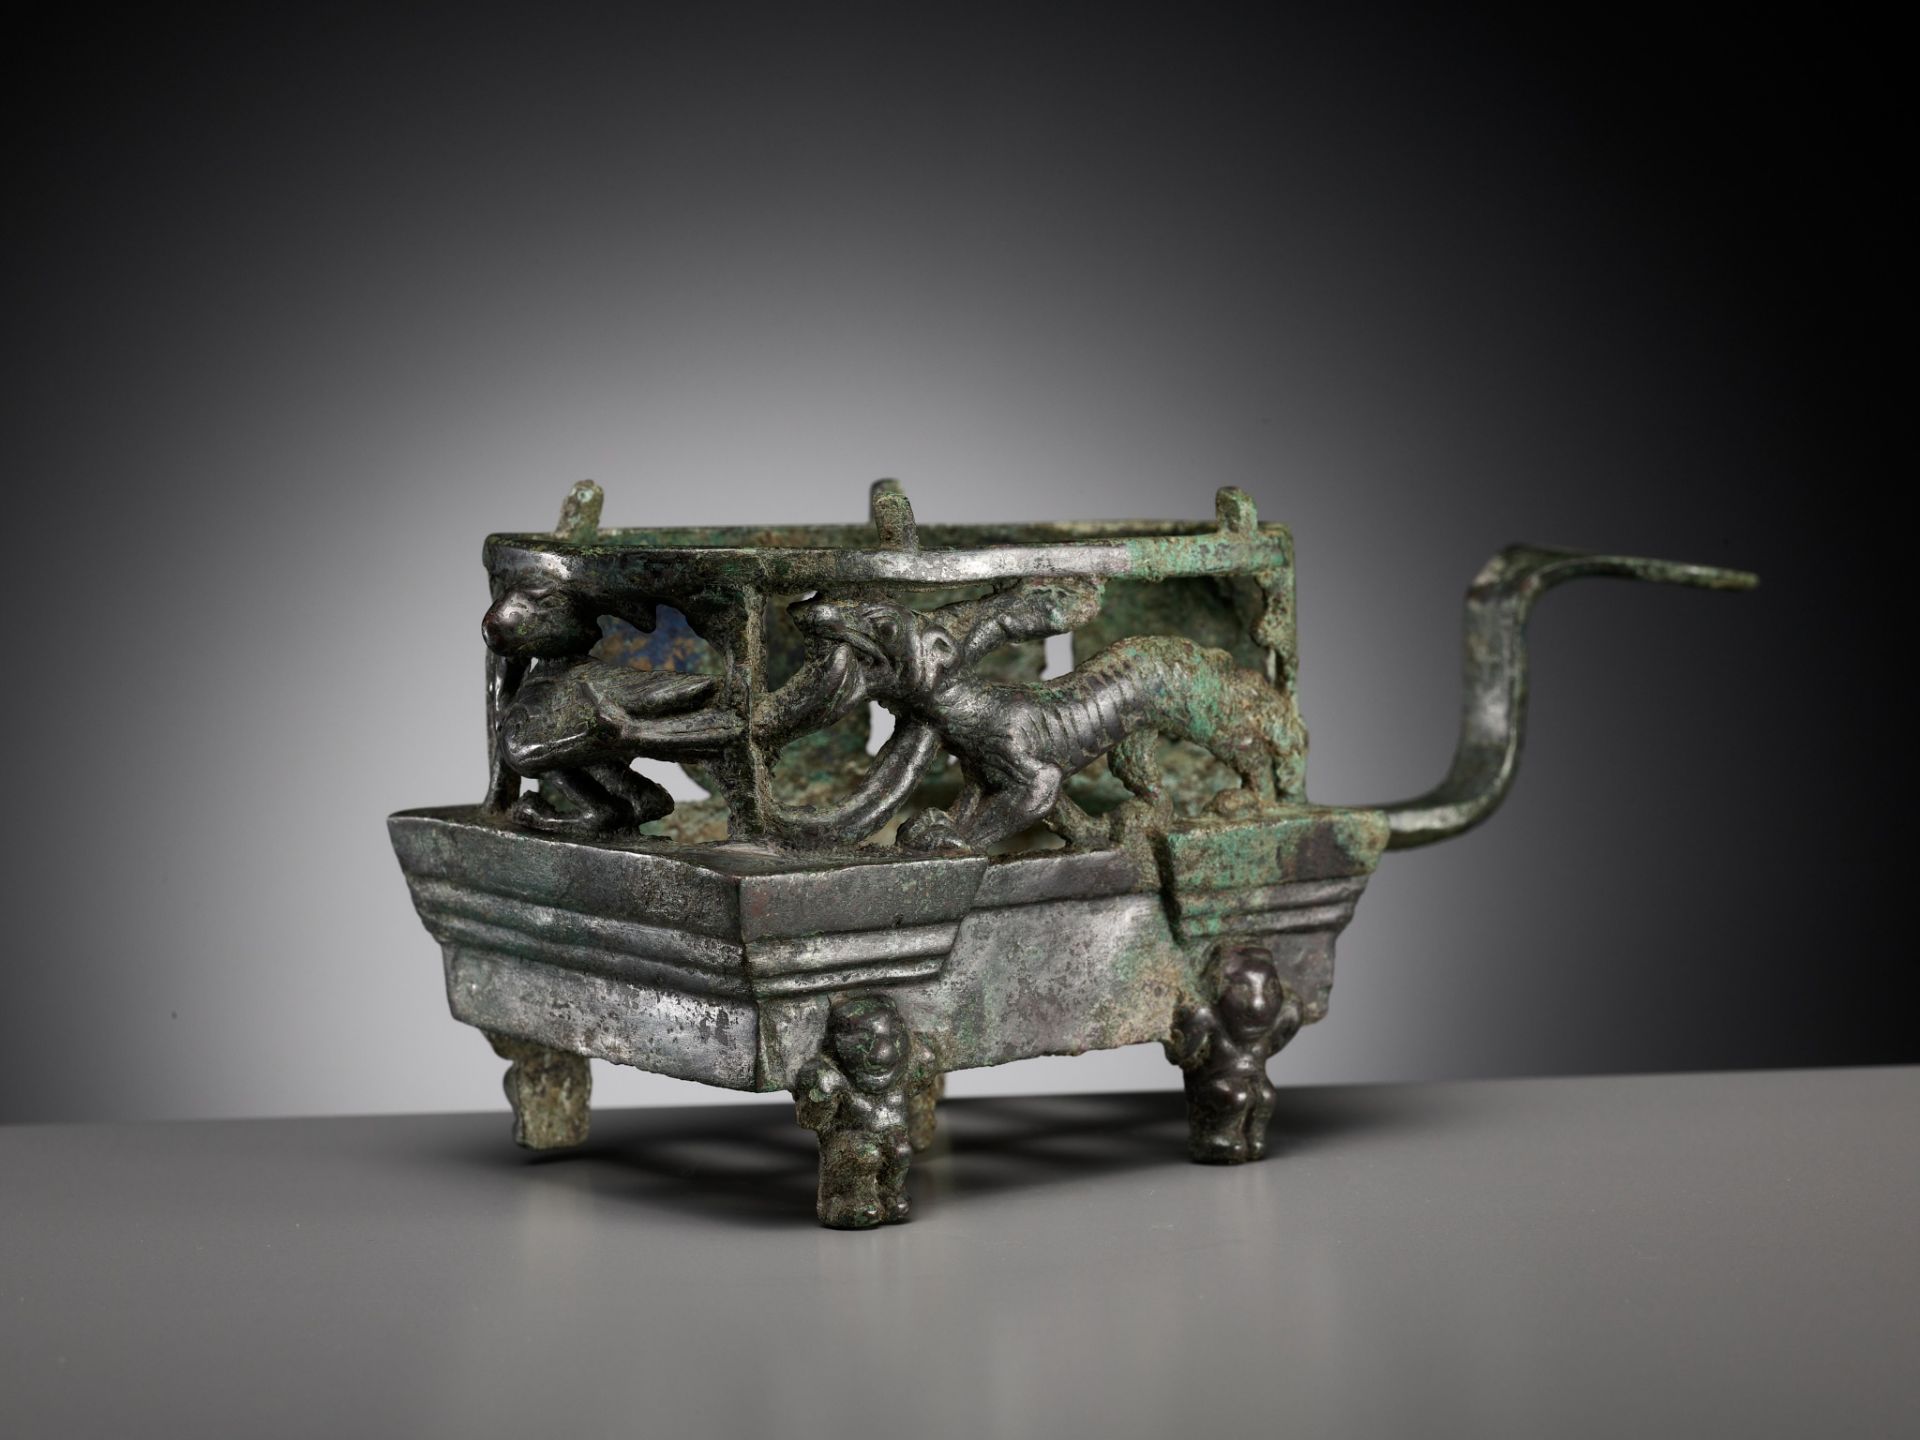 A 'FOUR AUSPICIOUS BEASTS' (SI XIANG) BRONZE BRAZIER, HAN DYNASTY, CHINA, 206 BC-220 AD - Image 13 of 16